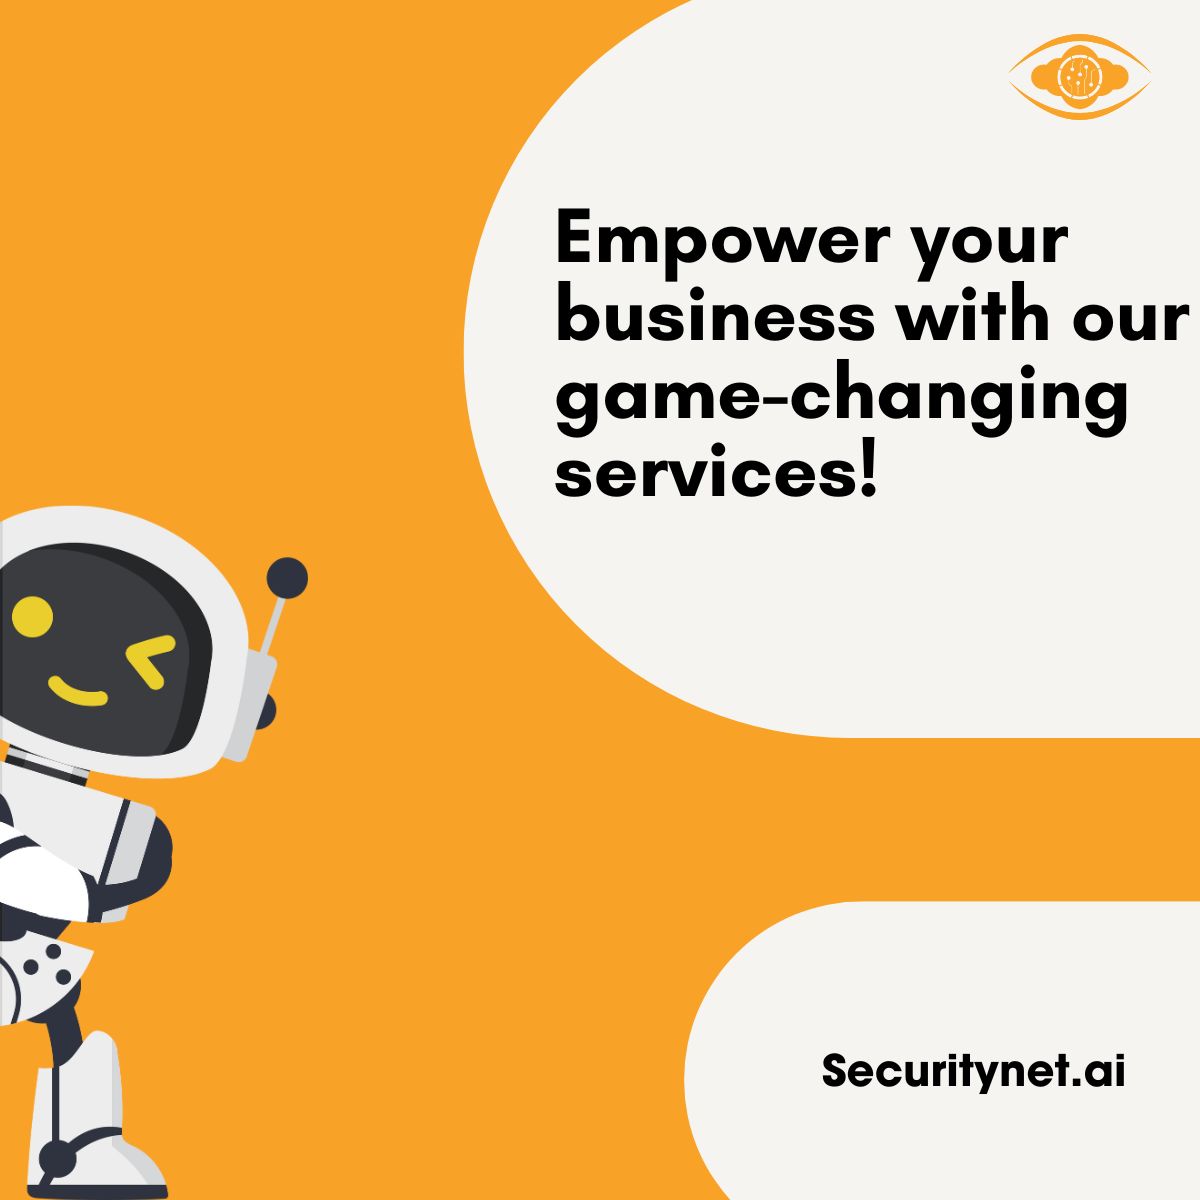 'Wish I had a security system that could...'  Securitynet.ai can!  Our AI-powered cameras offer facial recognition, object detection, and more.  Get a system that fits your needs. #securitywishes #aipoweredcamera #facialrecognition #objectdetection #customsecurity